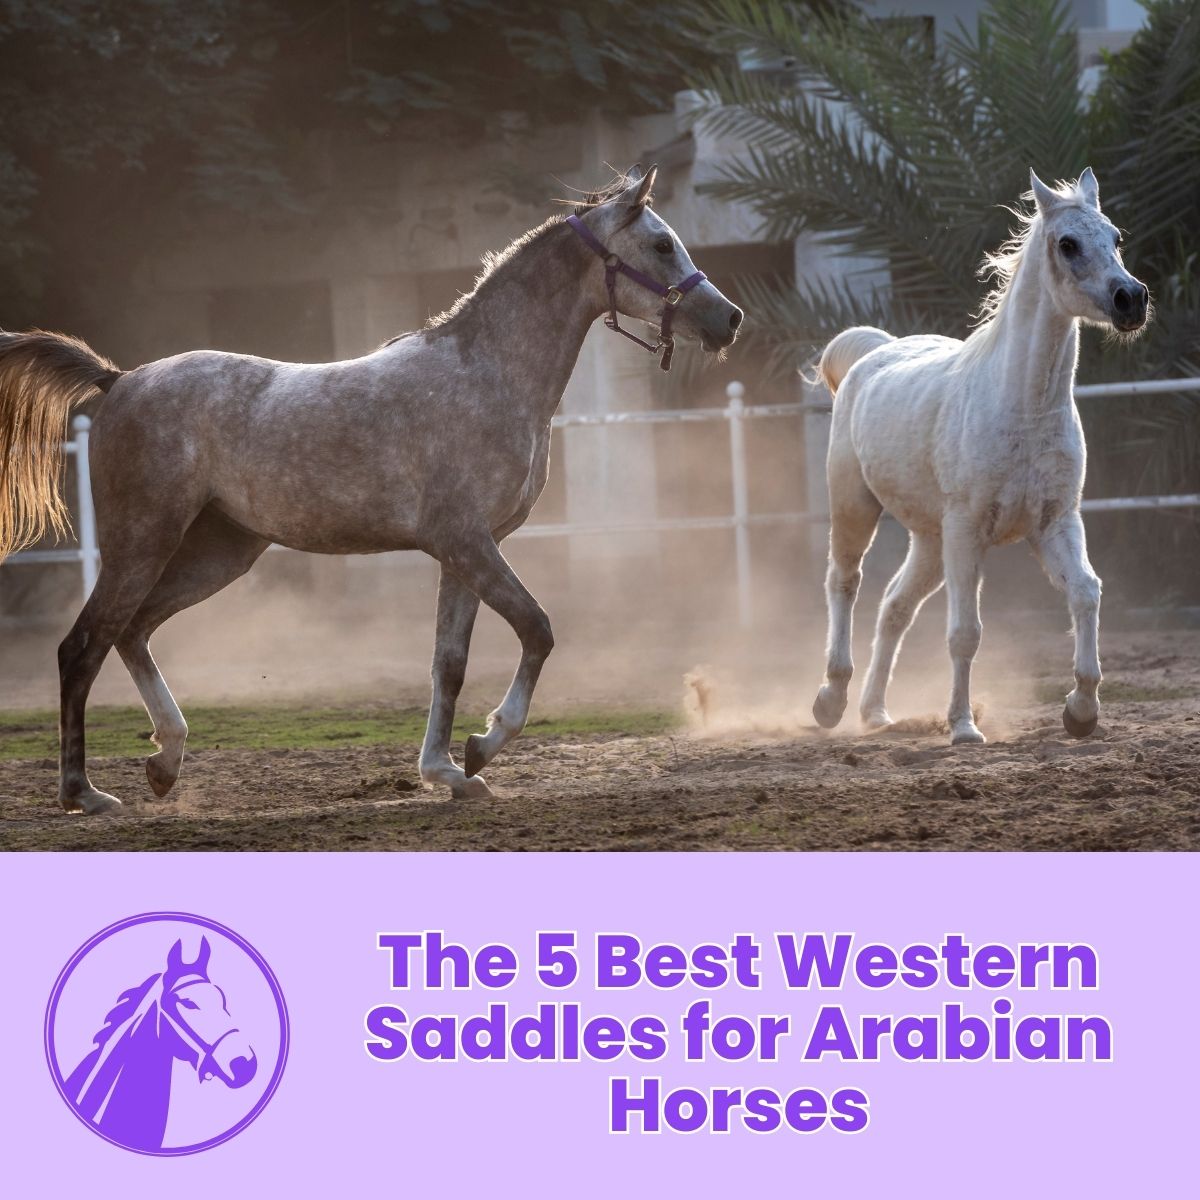 You are currently viewing The 5 Best Western Saddles for Arabian Horses